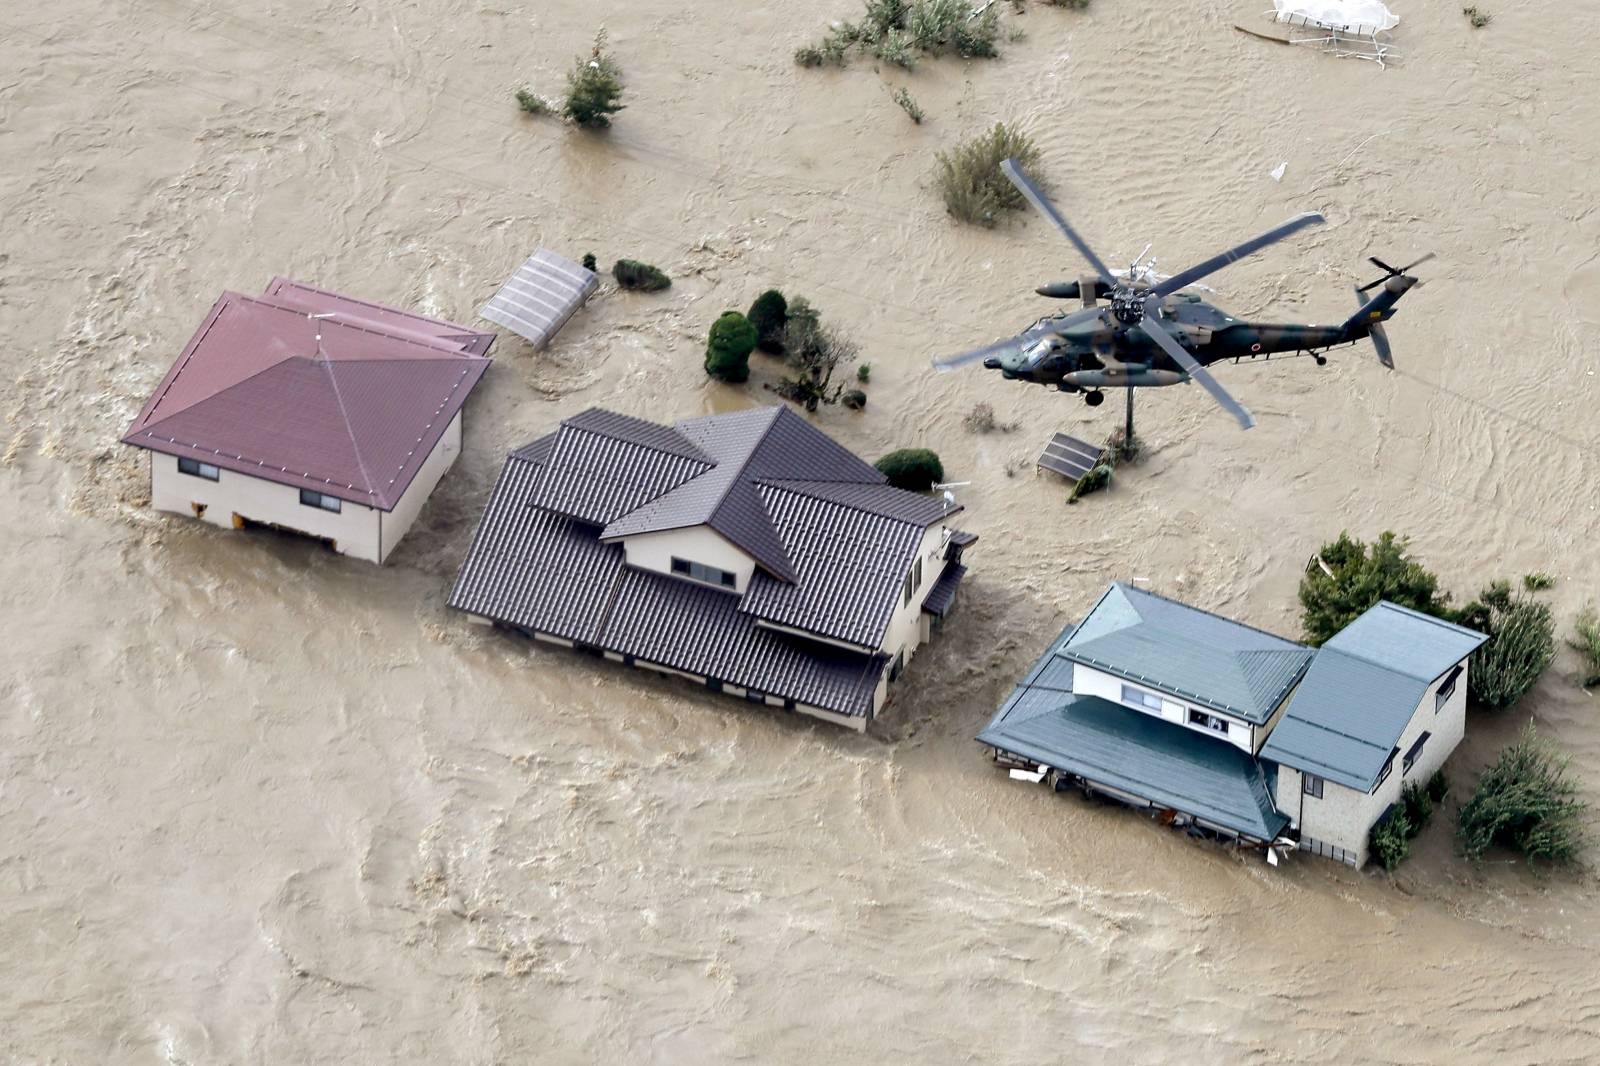 An aerial view shows a Japan Self-Defence Force helicopter flying over residential areas flooded by the Chikuma river following Typhoon Hagibis in Nagano